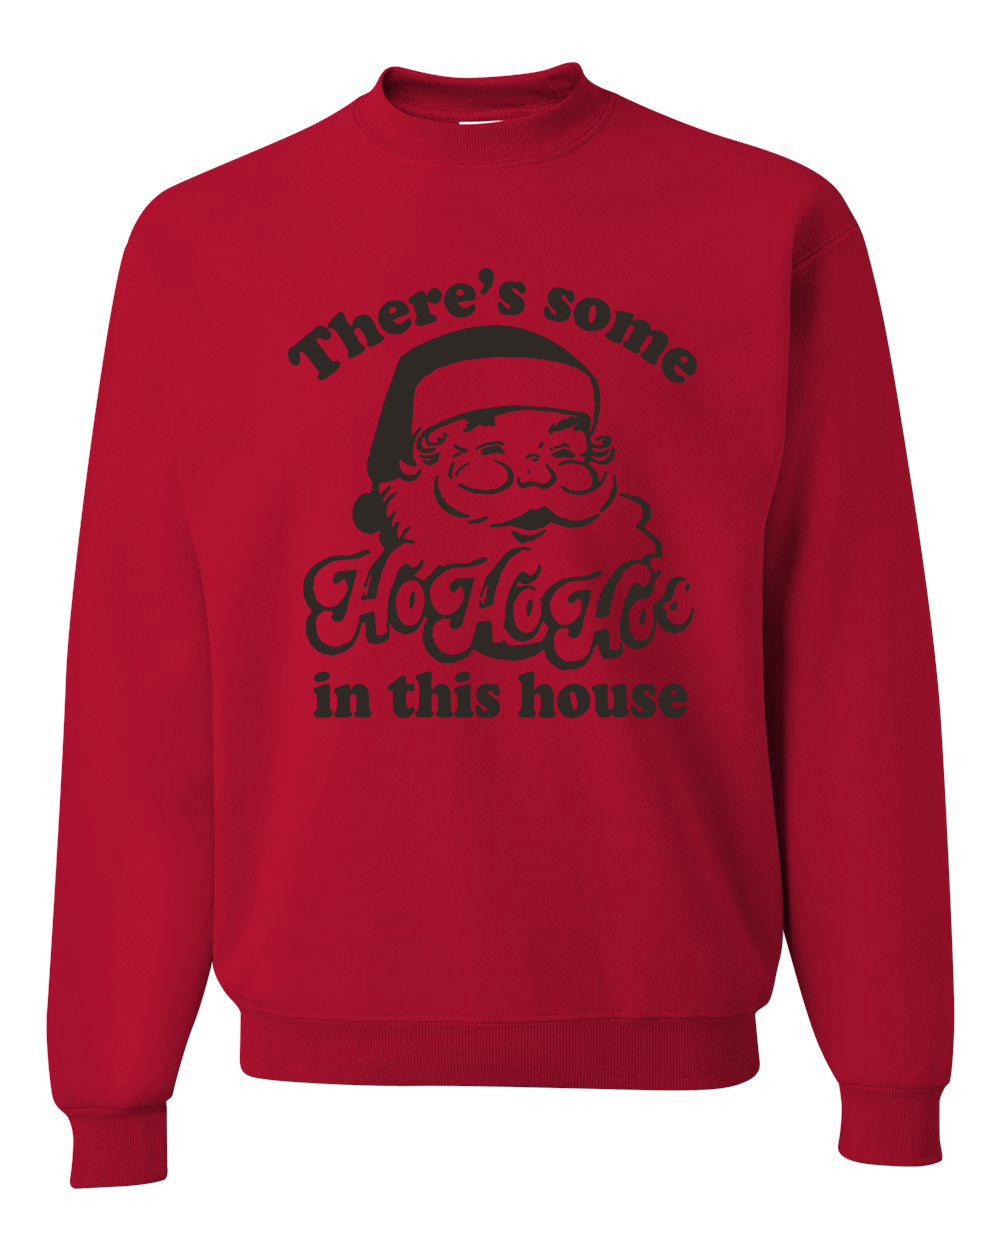 Theres Some Ho Ho Ho in This House Merry Christmas Unisex Crewneck Graphic Sweatshirt